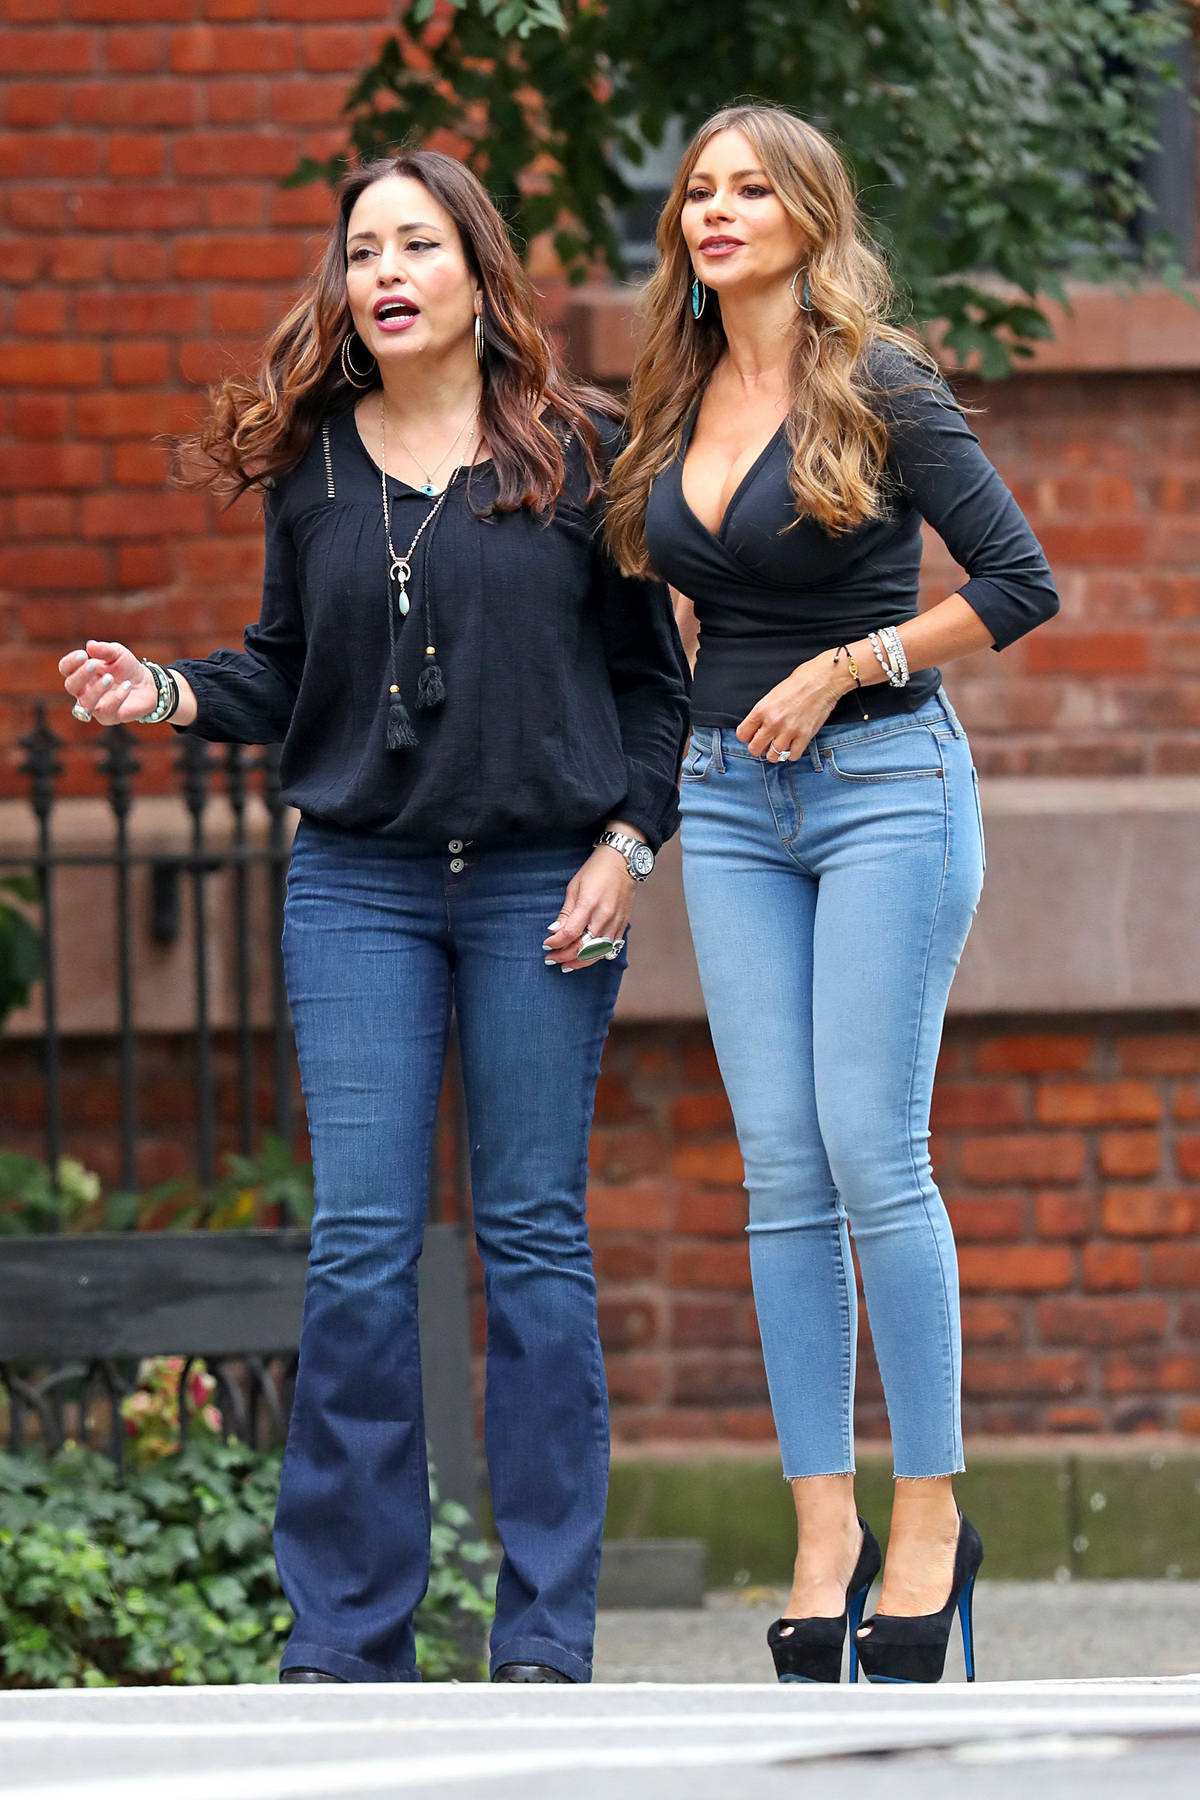 sofia vergara seen wearing a formfitting top, skinny jeans with ...